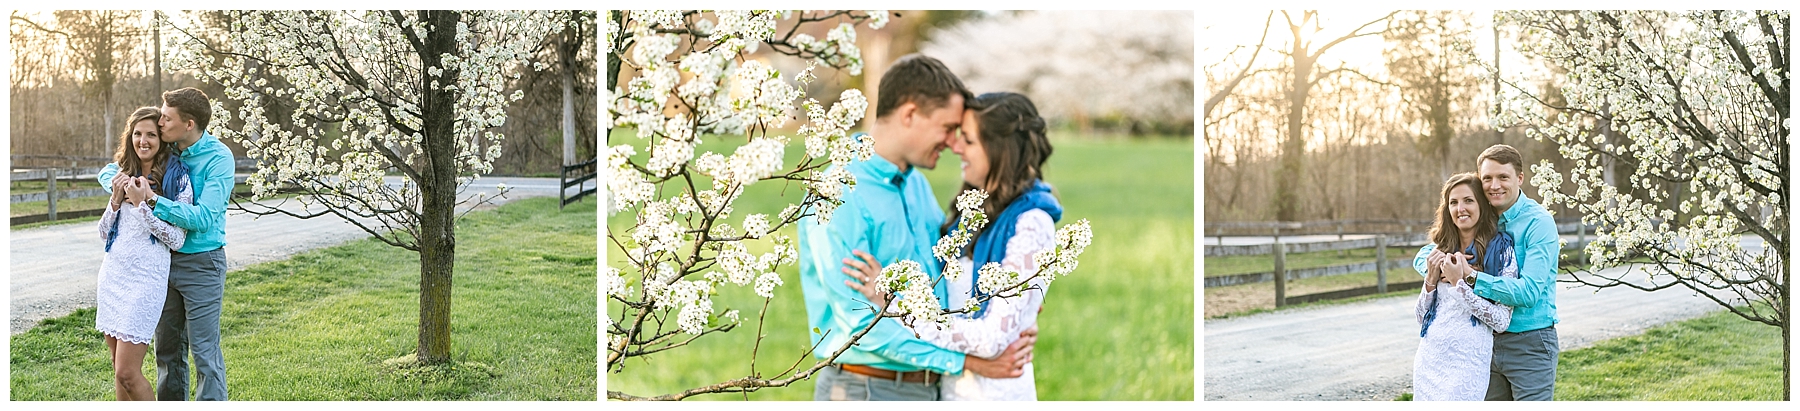 Chelsea Phil Private Estate Engagement Living Radiant Photography photos color_0029.jpg